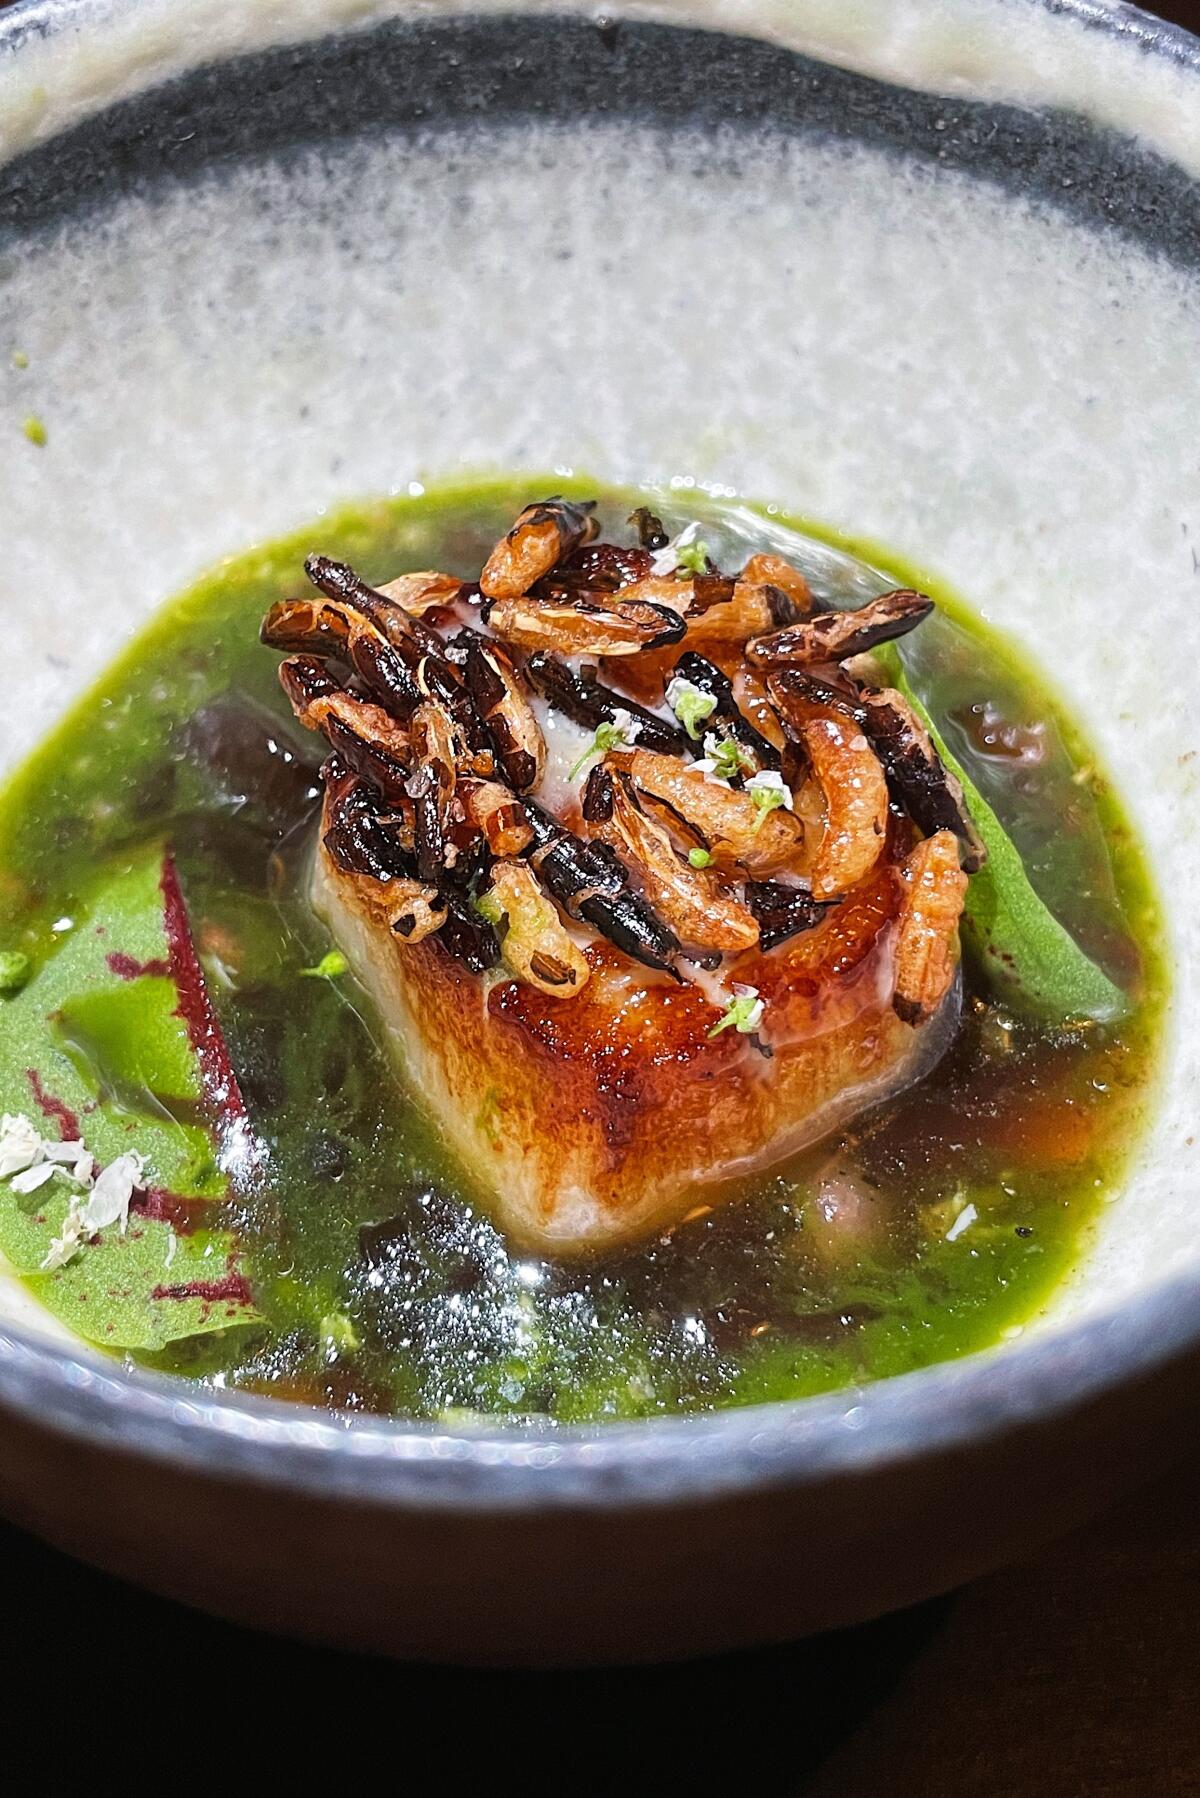 A browned Hokkaido scallop topped with puffed rice sits in green broth in a ceramic bowl at Baroo LA.